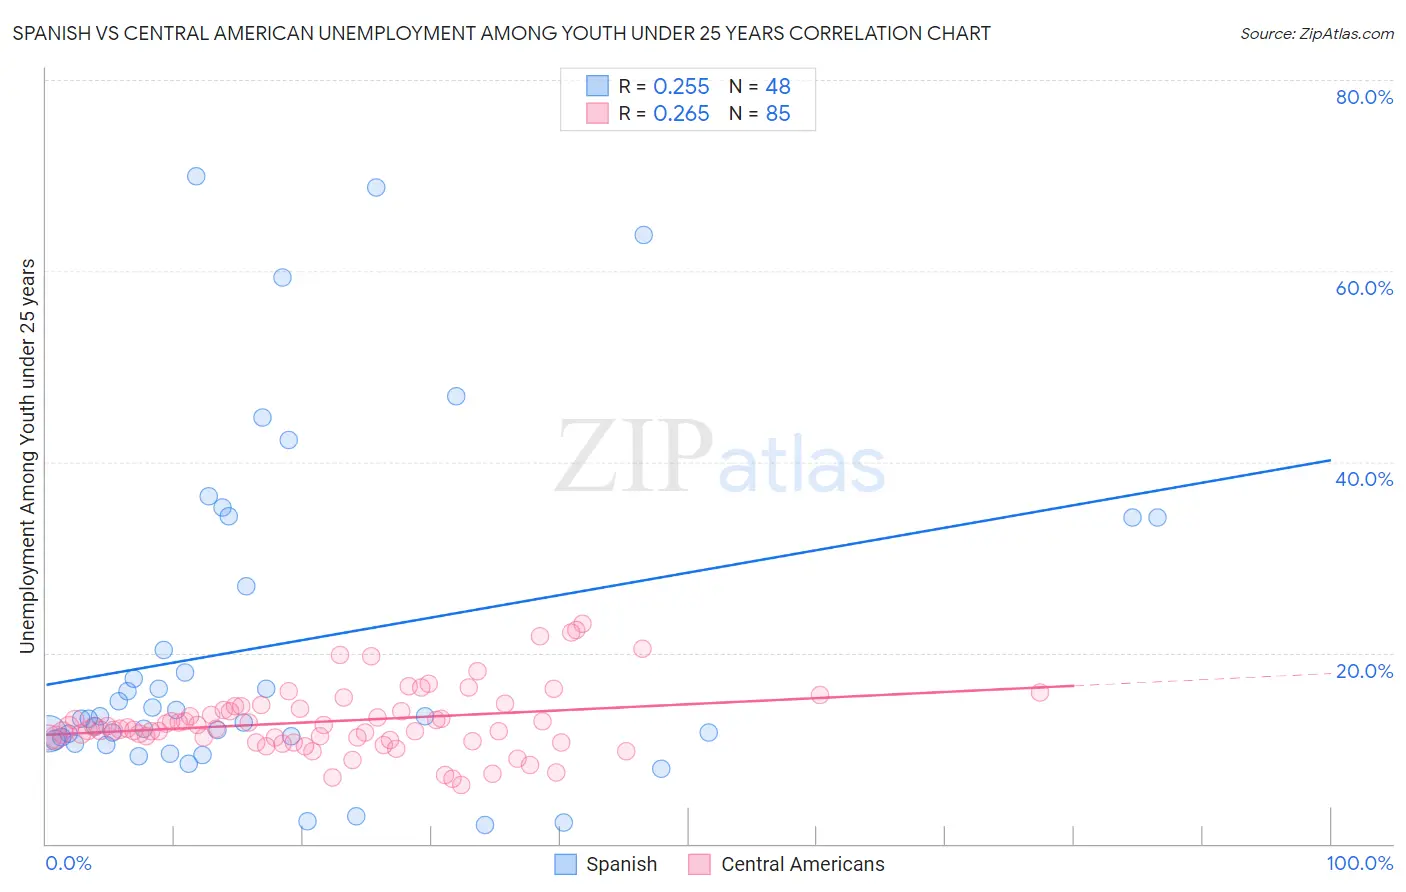 Spanish vs Central American Unemployment Among Youth under 25 years